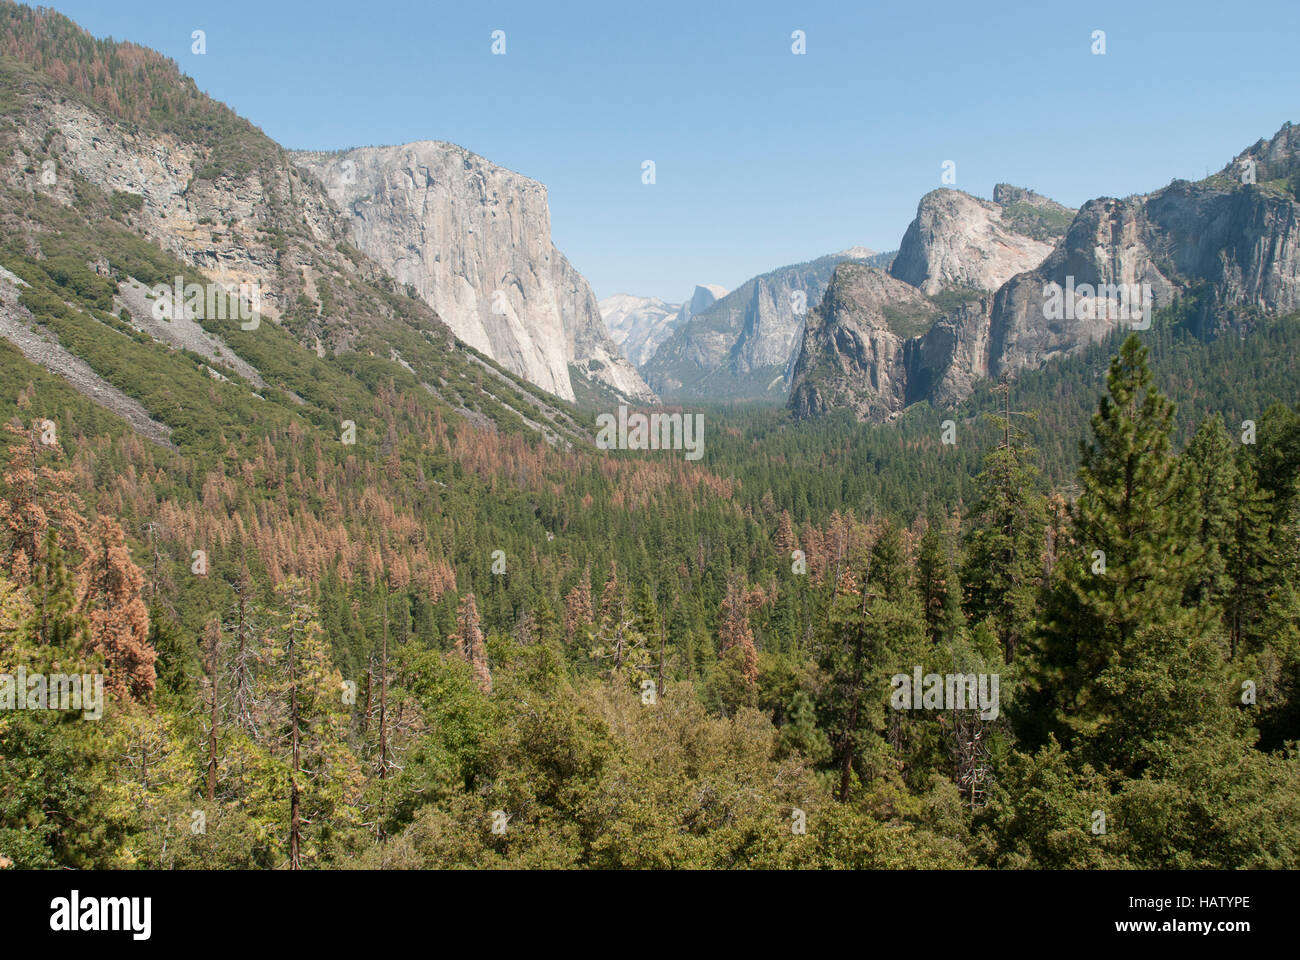 A view down the Yosemite Valley shows pine trees browned by drought and bark beetle damage. Stock Photo